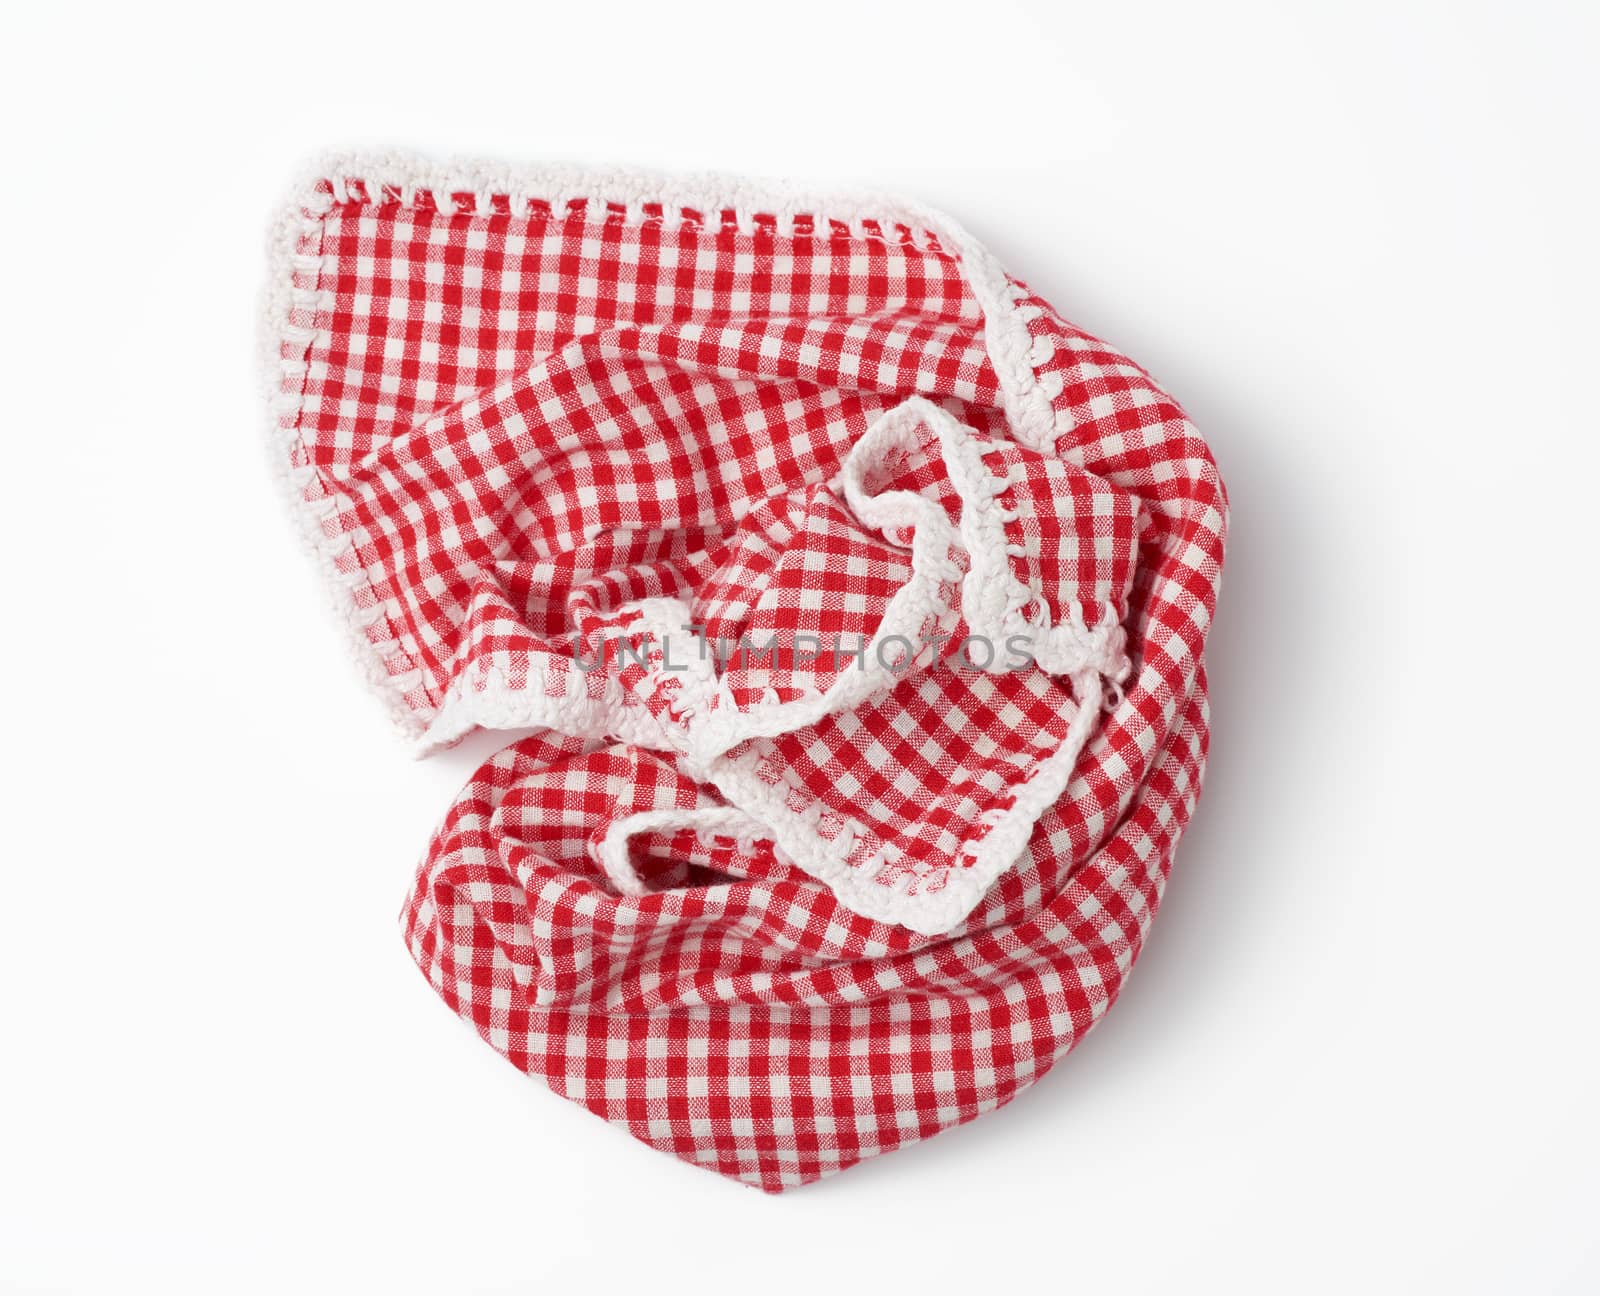 crumpled kitchen red-white towel in on a white background, top view